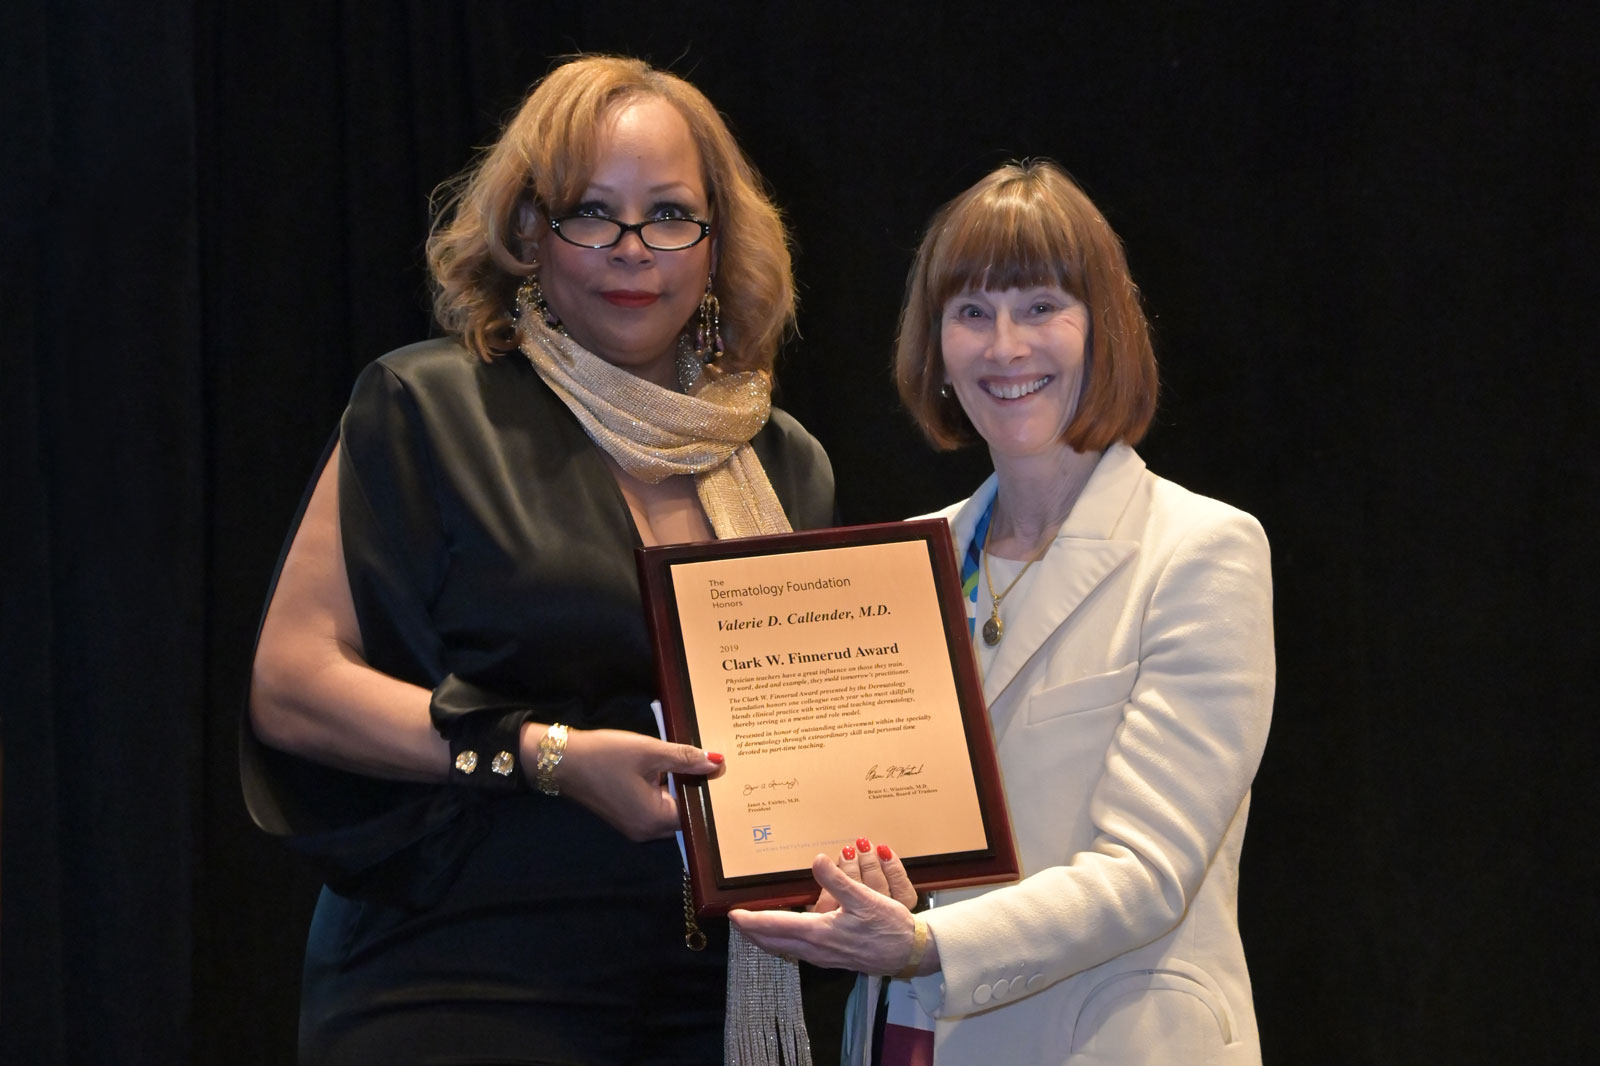 Dr. Callender <i>(left)</i> receives the Clark W. Finnerud award from DF President Dr. Janet Fairley <i>(right)</i>. The award celebrates an individual who blends a clinical practice with writing and teaching dermatology.